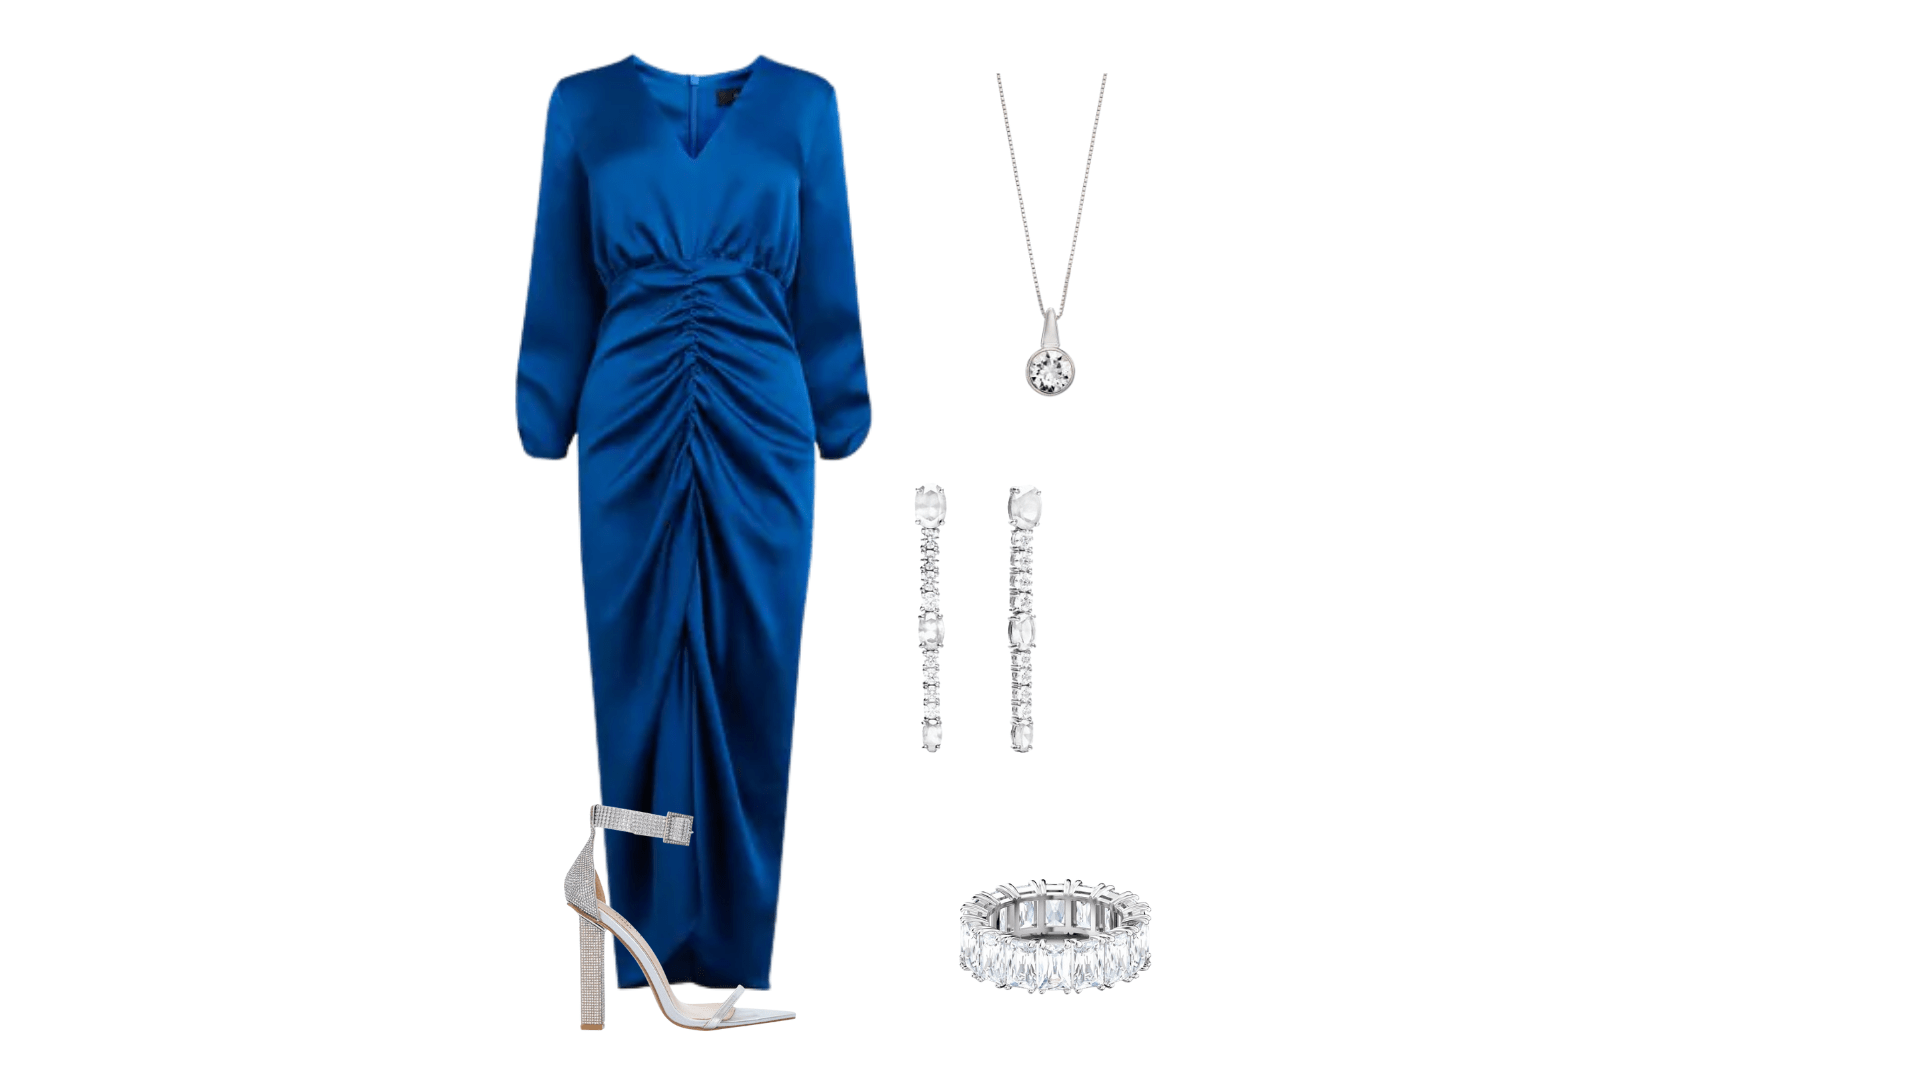 Royal blue dress with silver heels and silver jewellery.